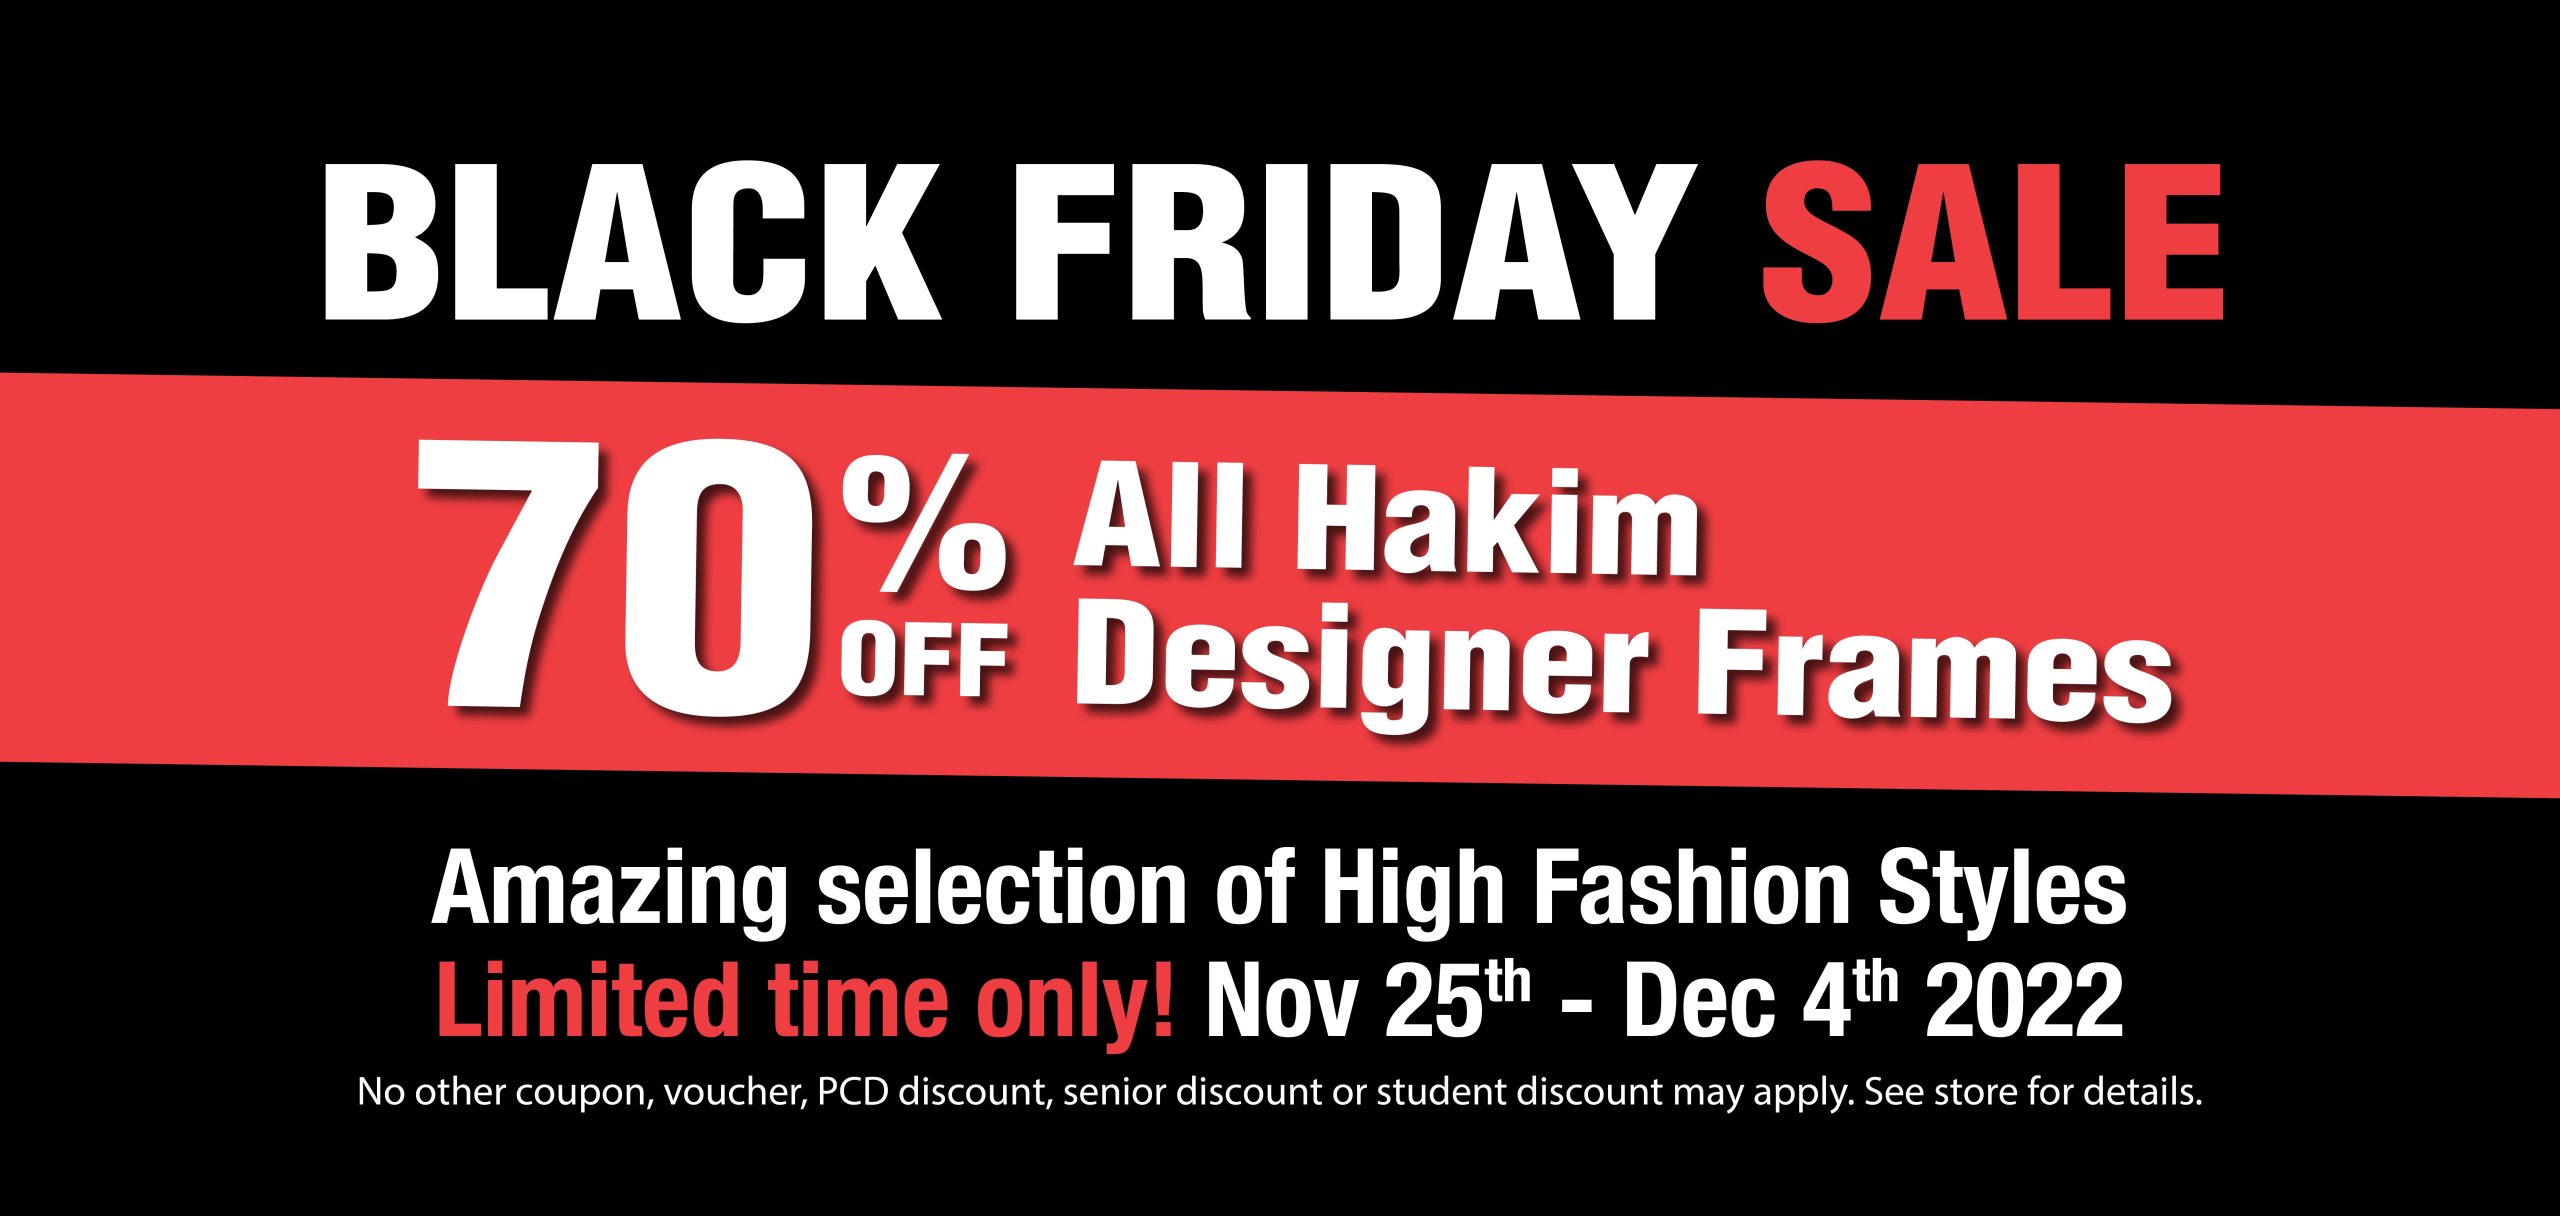 Take advantage of our Black Friday sale from Nov 25th - Dec 4th.  Save 70% off all Hakim Designer Frames!